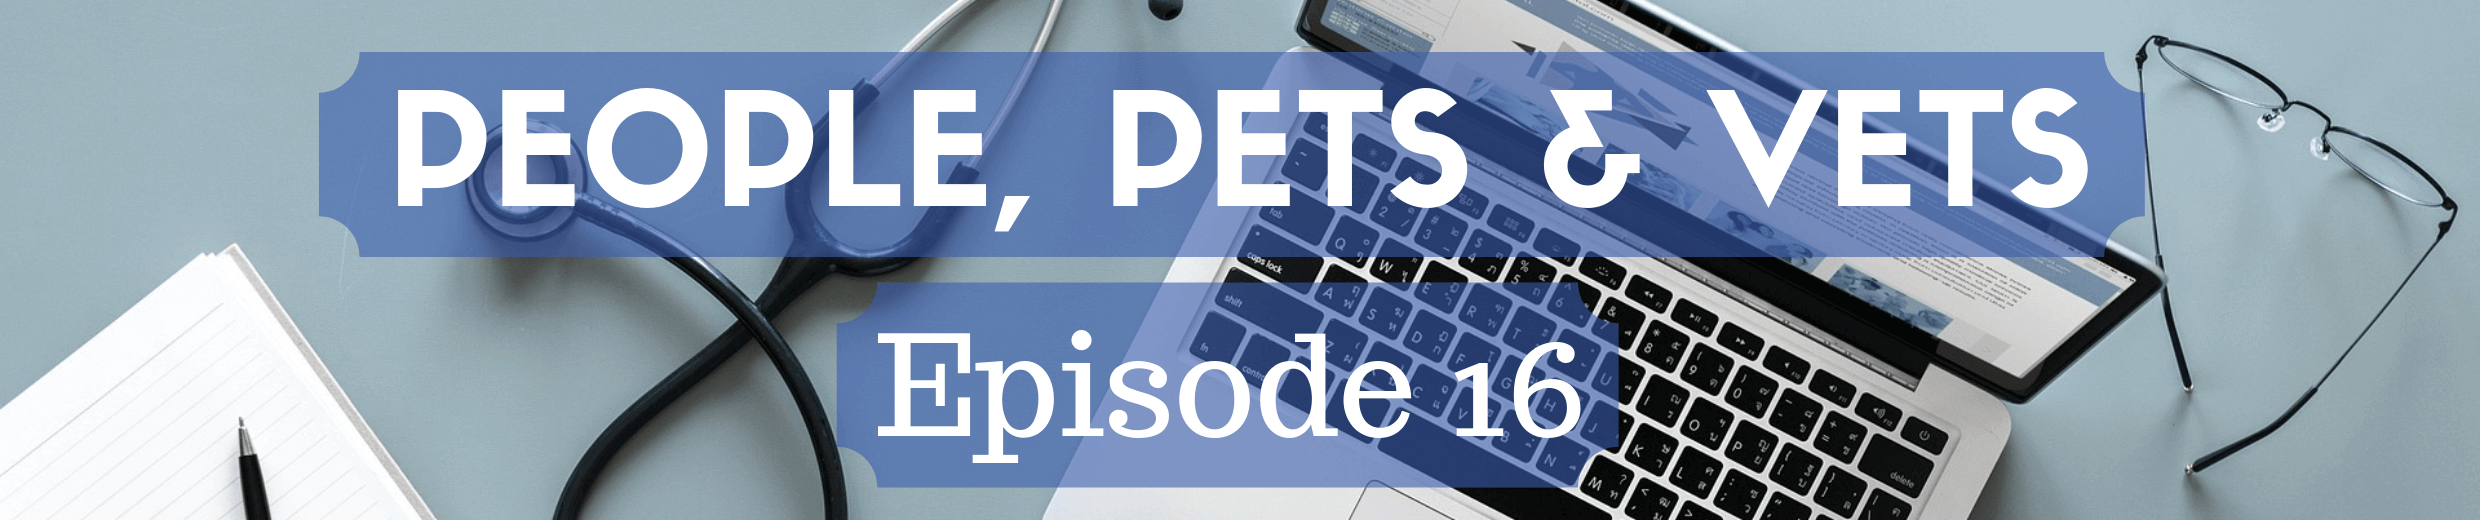 People Pets and Vets Episode 16